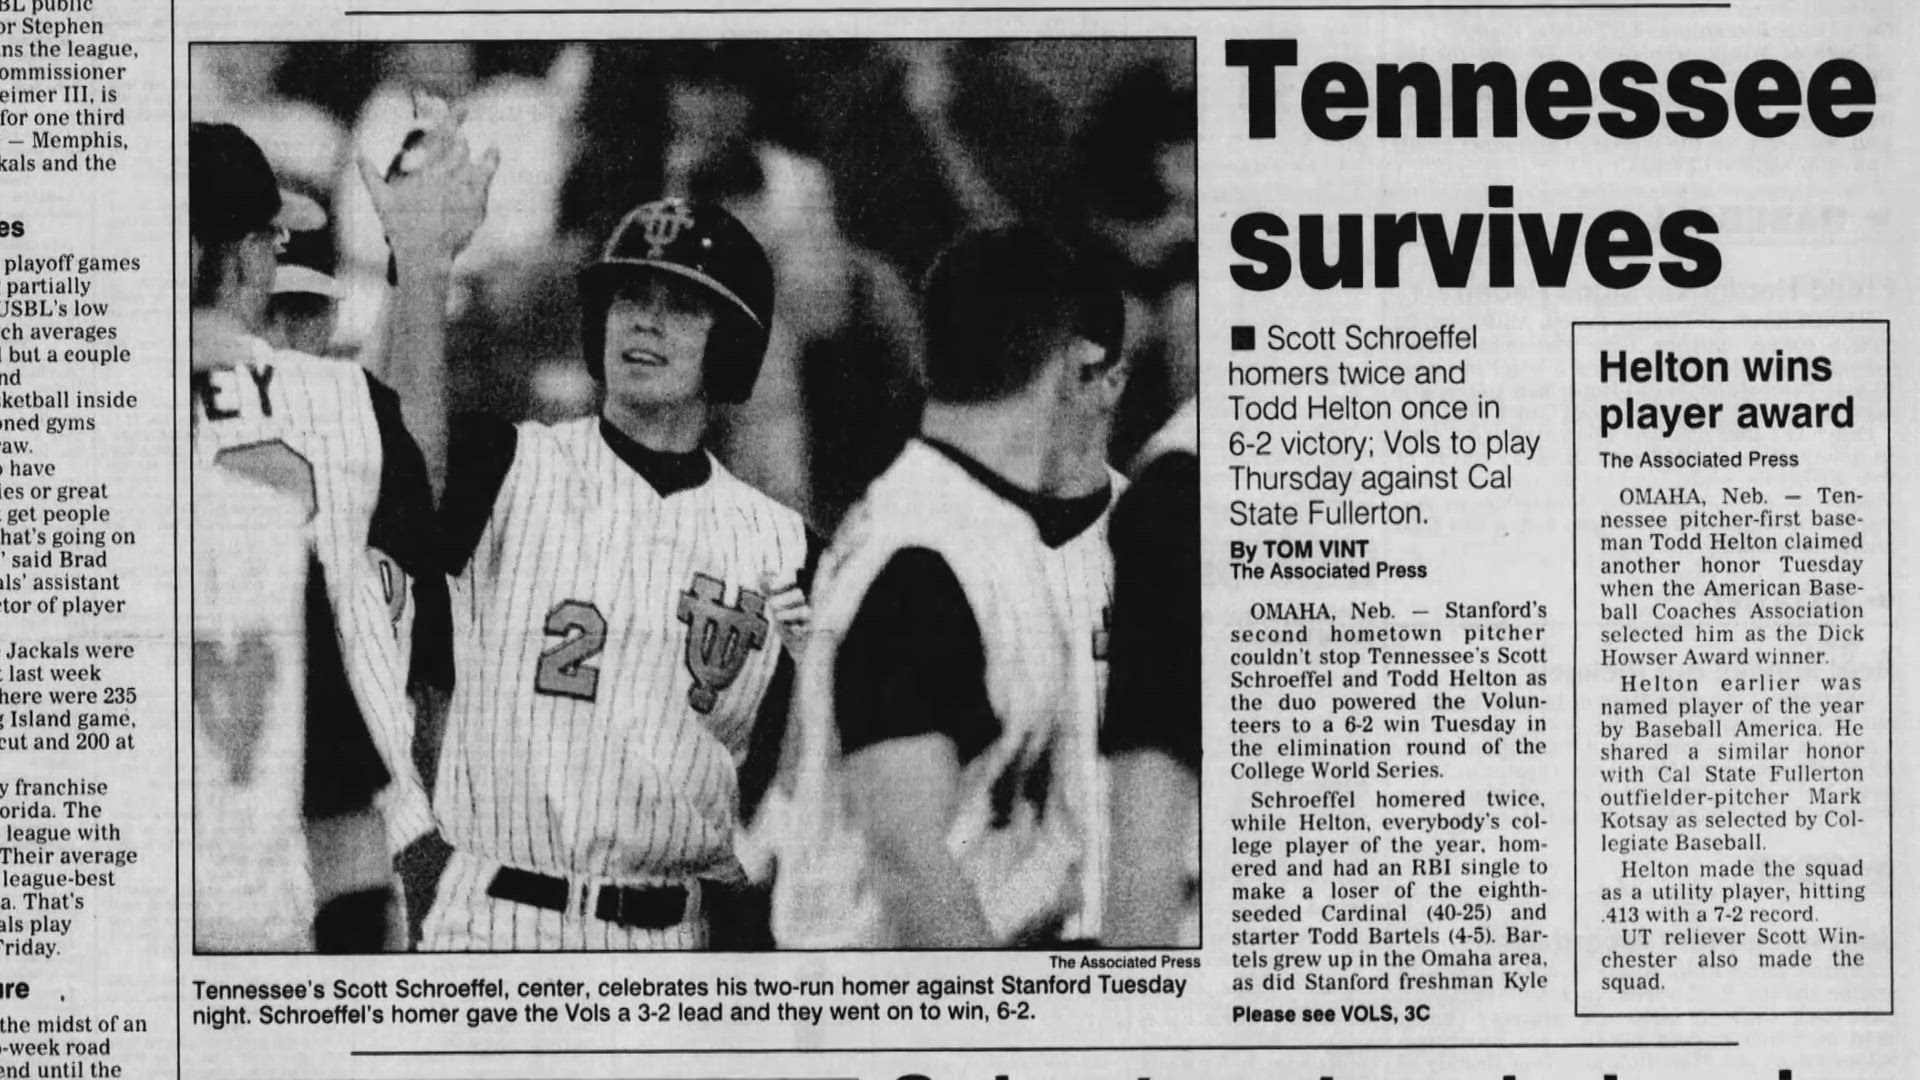 The Vols have made seven appearances in Omaha since 1951.